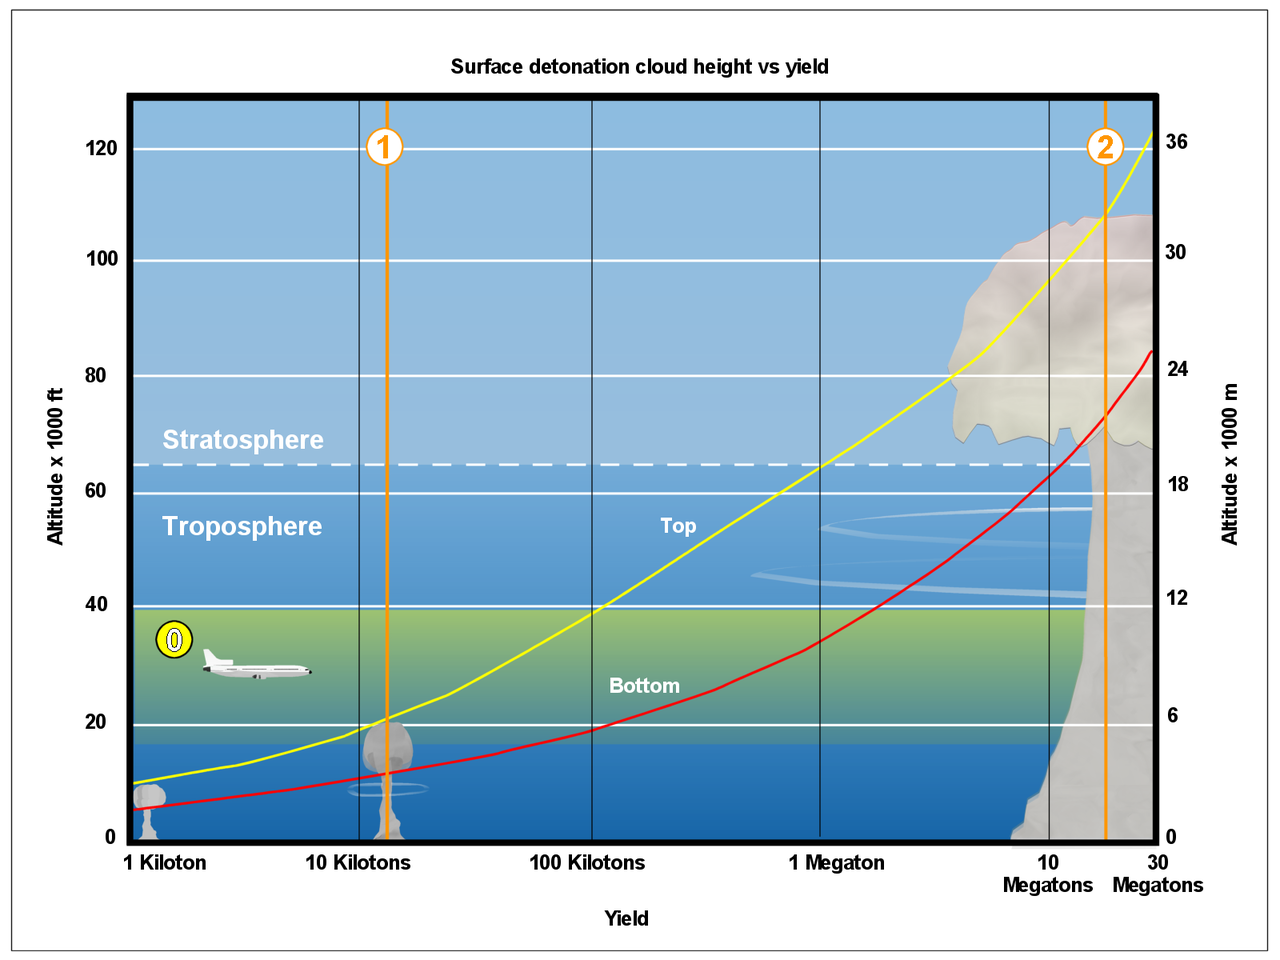 This chart illustrates the mushroom cloud height as a function of explosive yield detonated as surface blasts. In this illustration, 0 is the approximate altitude commercial aircraft operate; 1 is the scale of the "Fat Man" nuclear weapons test; 2 is the "Castle Bravo" nuclear weapons test blast. 